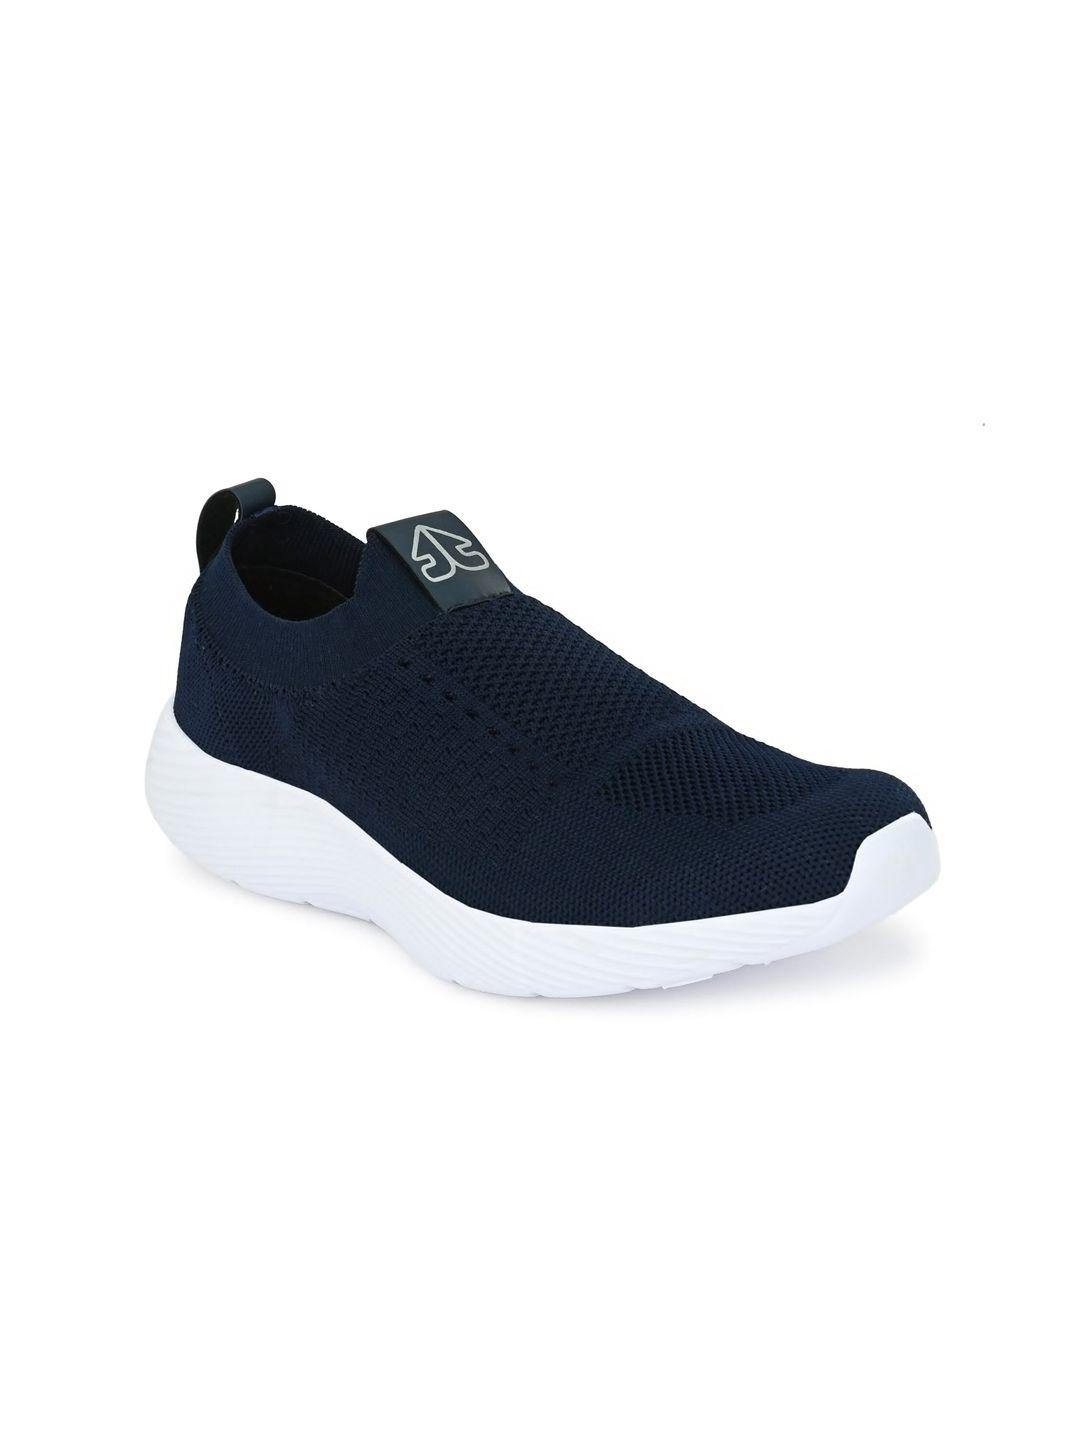 off limits men navy blue & white sneakers